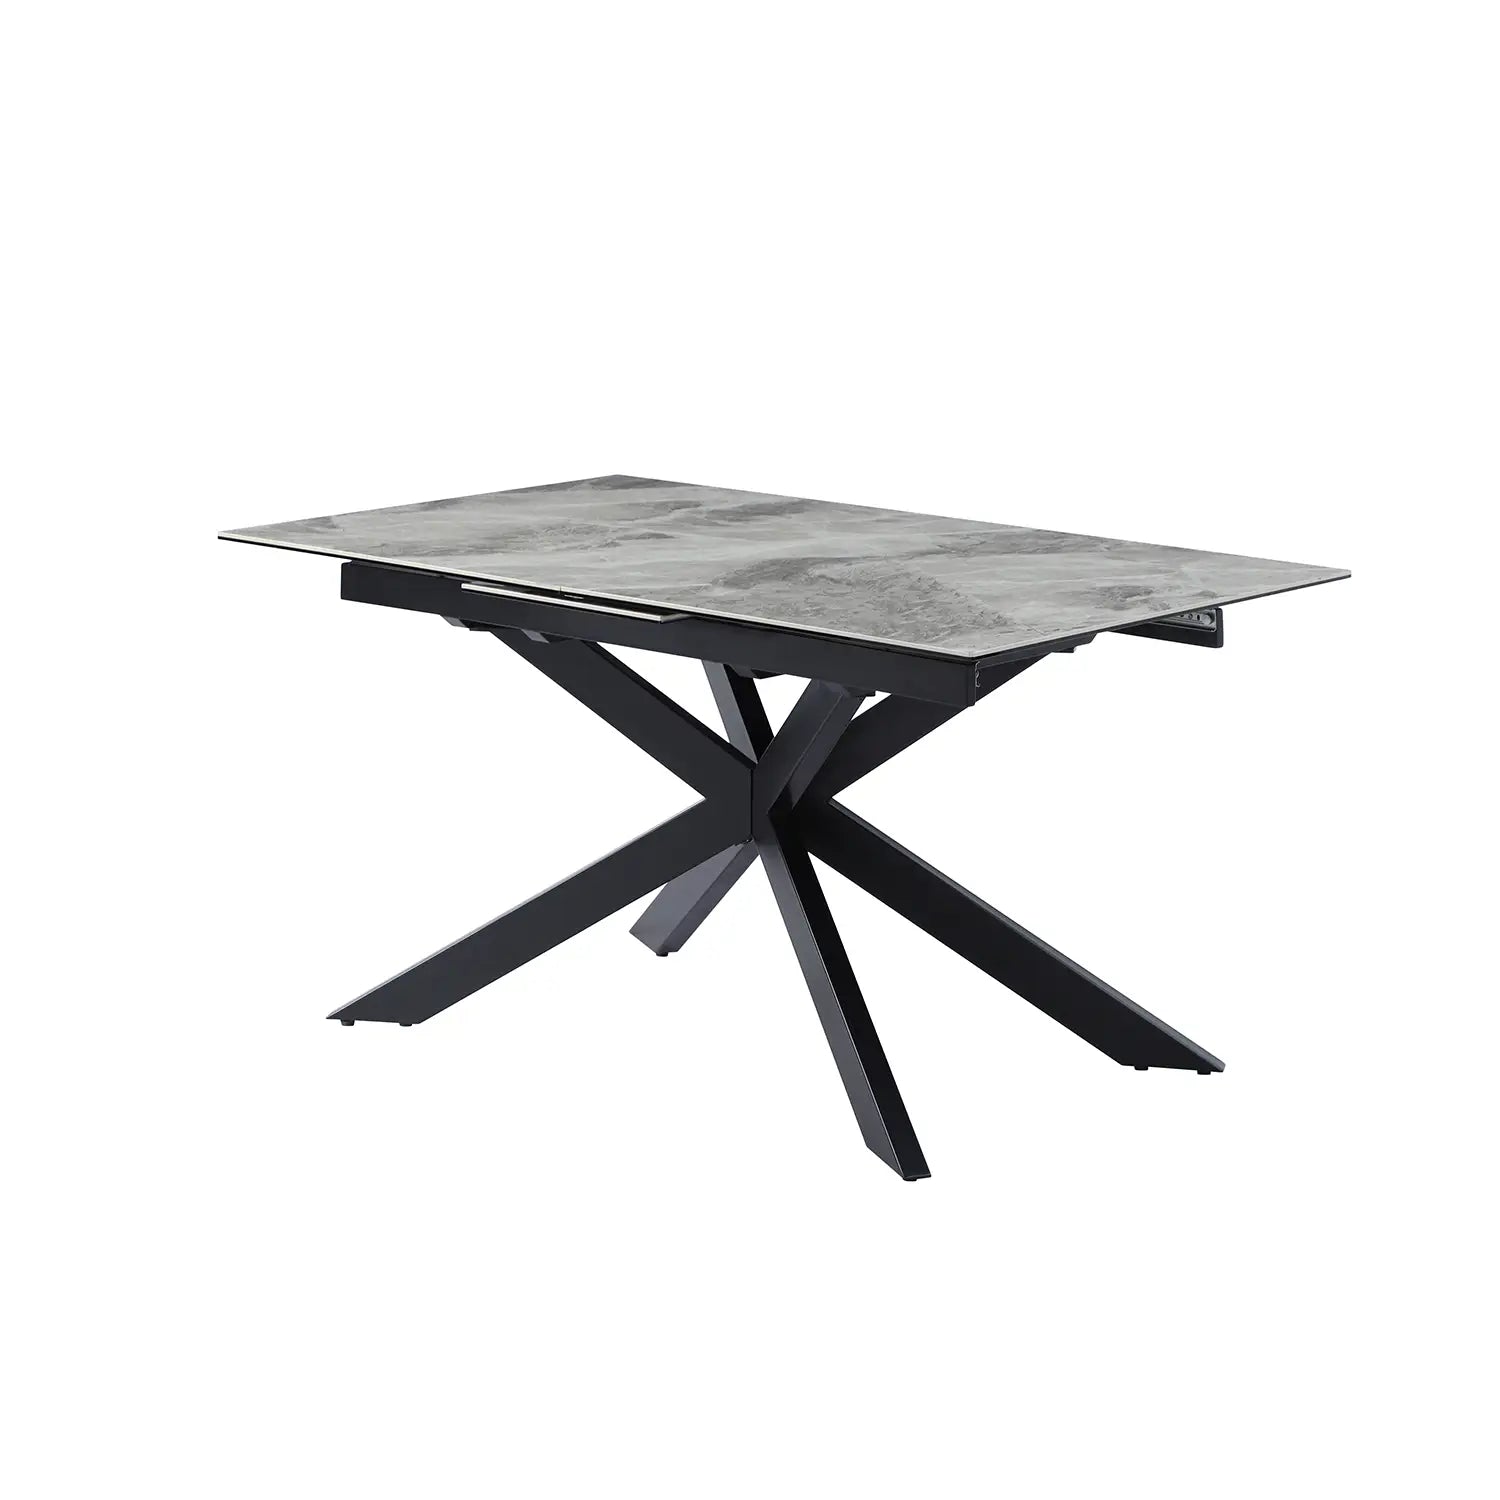 Creed Light Grey Extendable Ceramic Dining Table